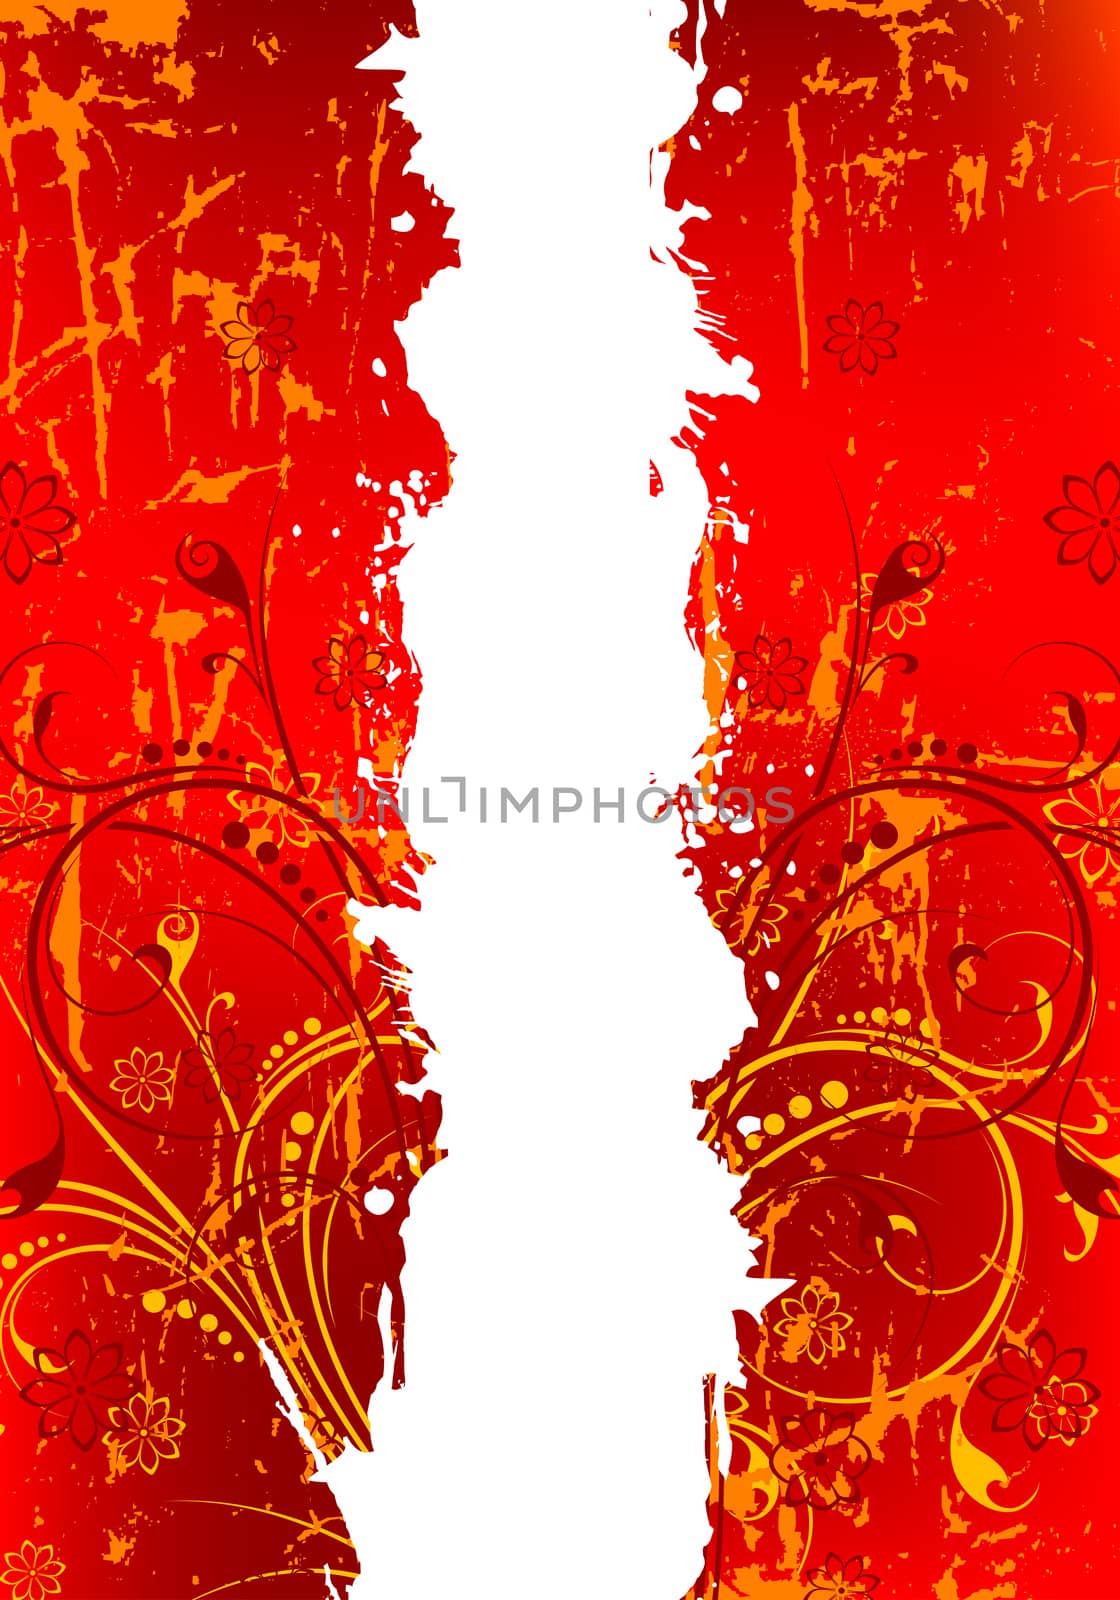 Abstract grunge background with floral scrolls in red color